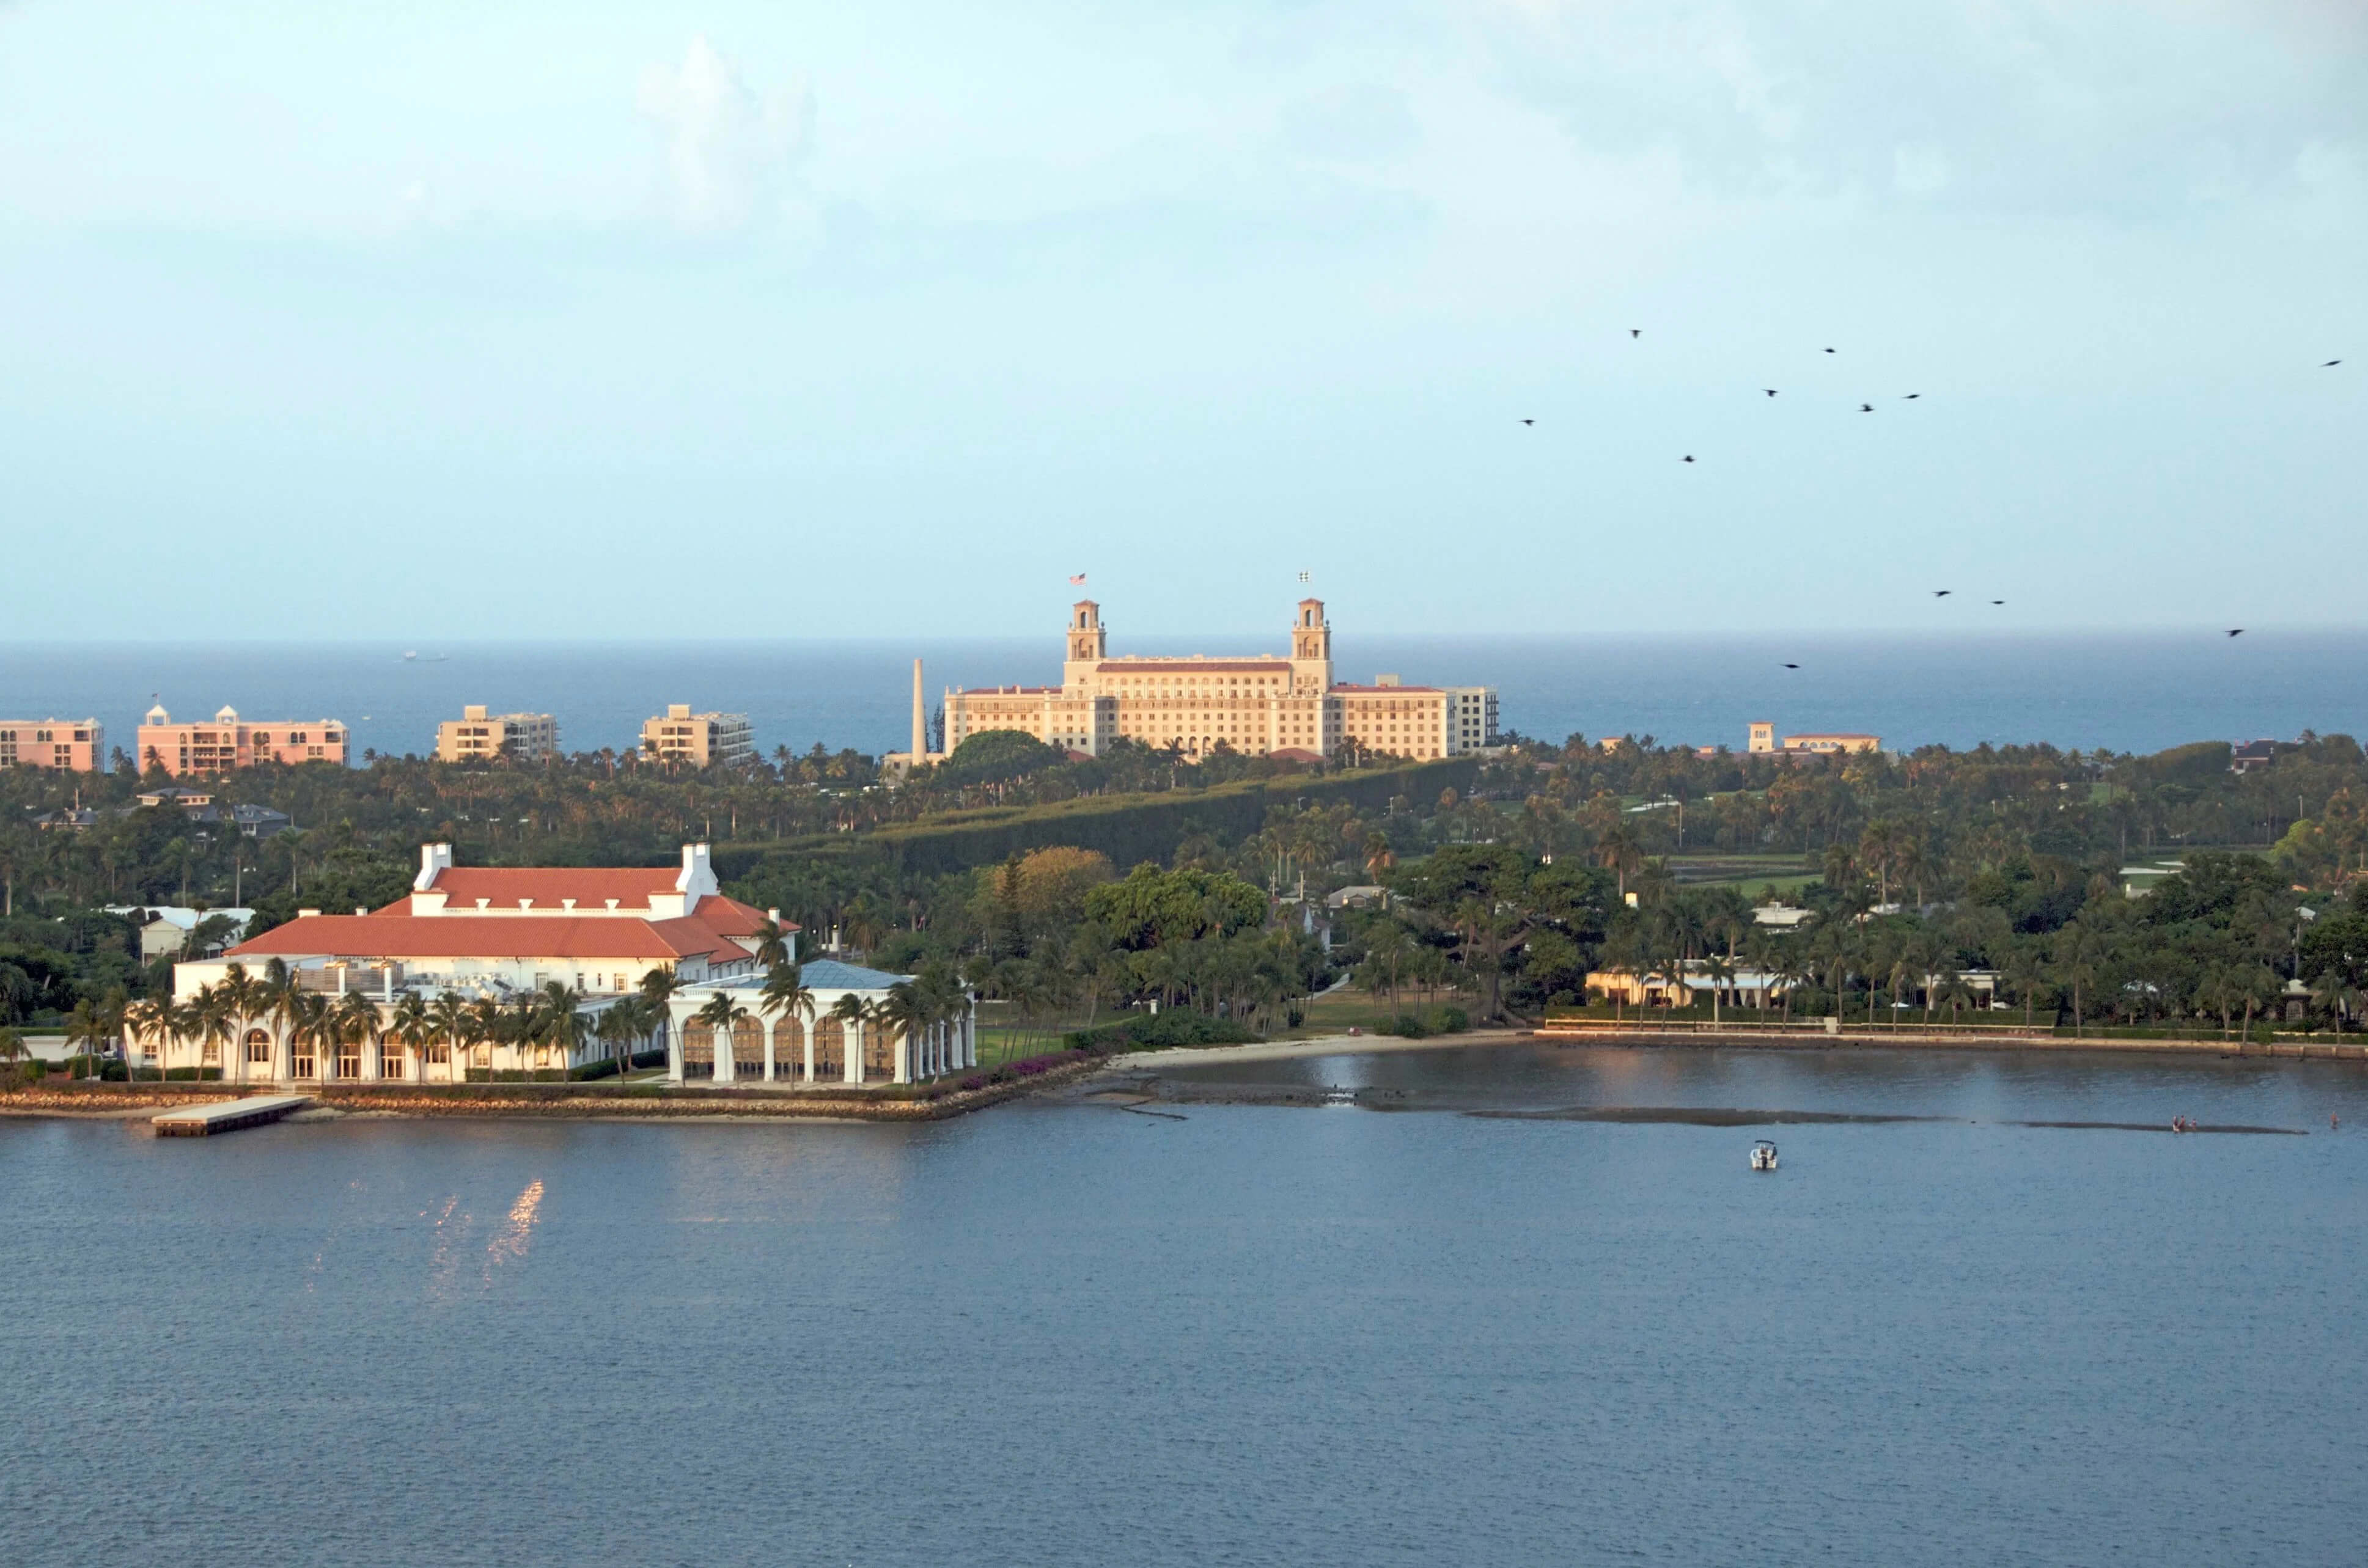 aerial view over the intracoastal water of Palm beach looking at the Breakers Hotel out to the Atlantic Ocean